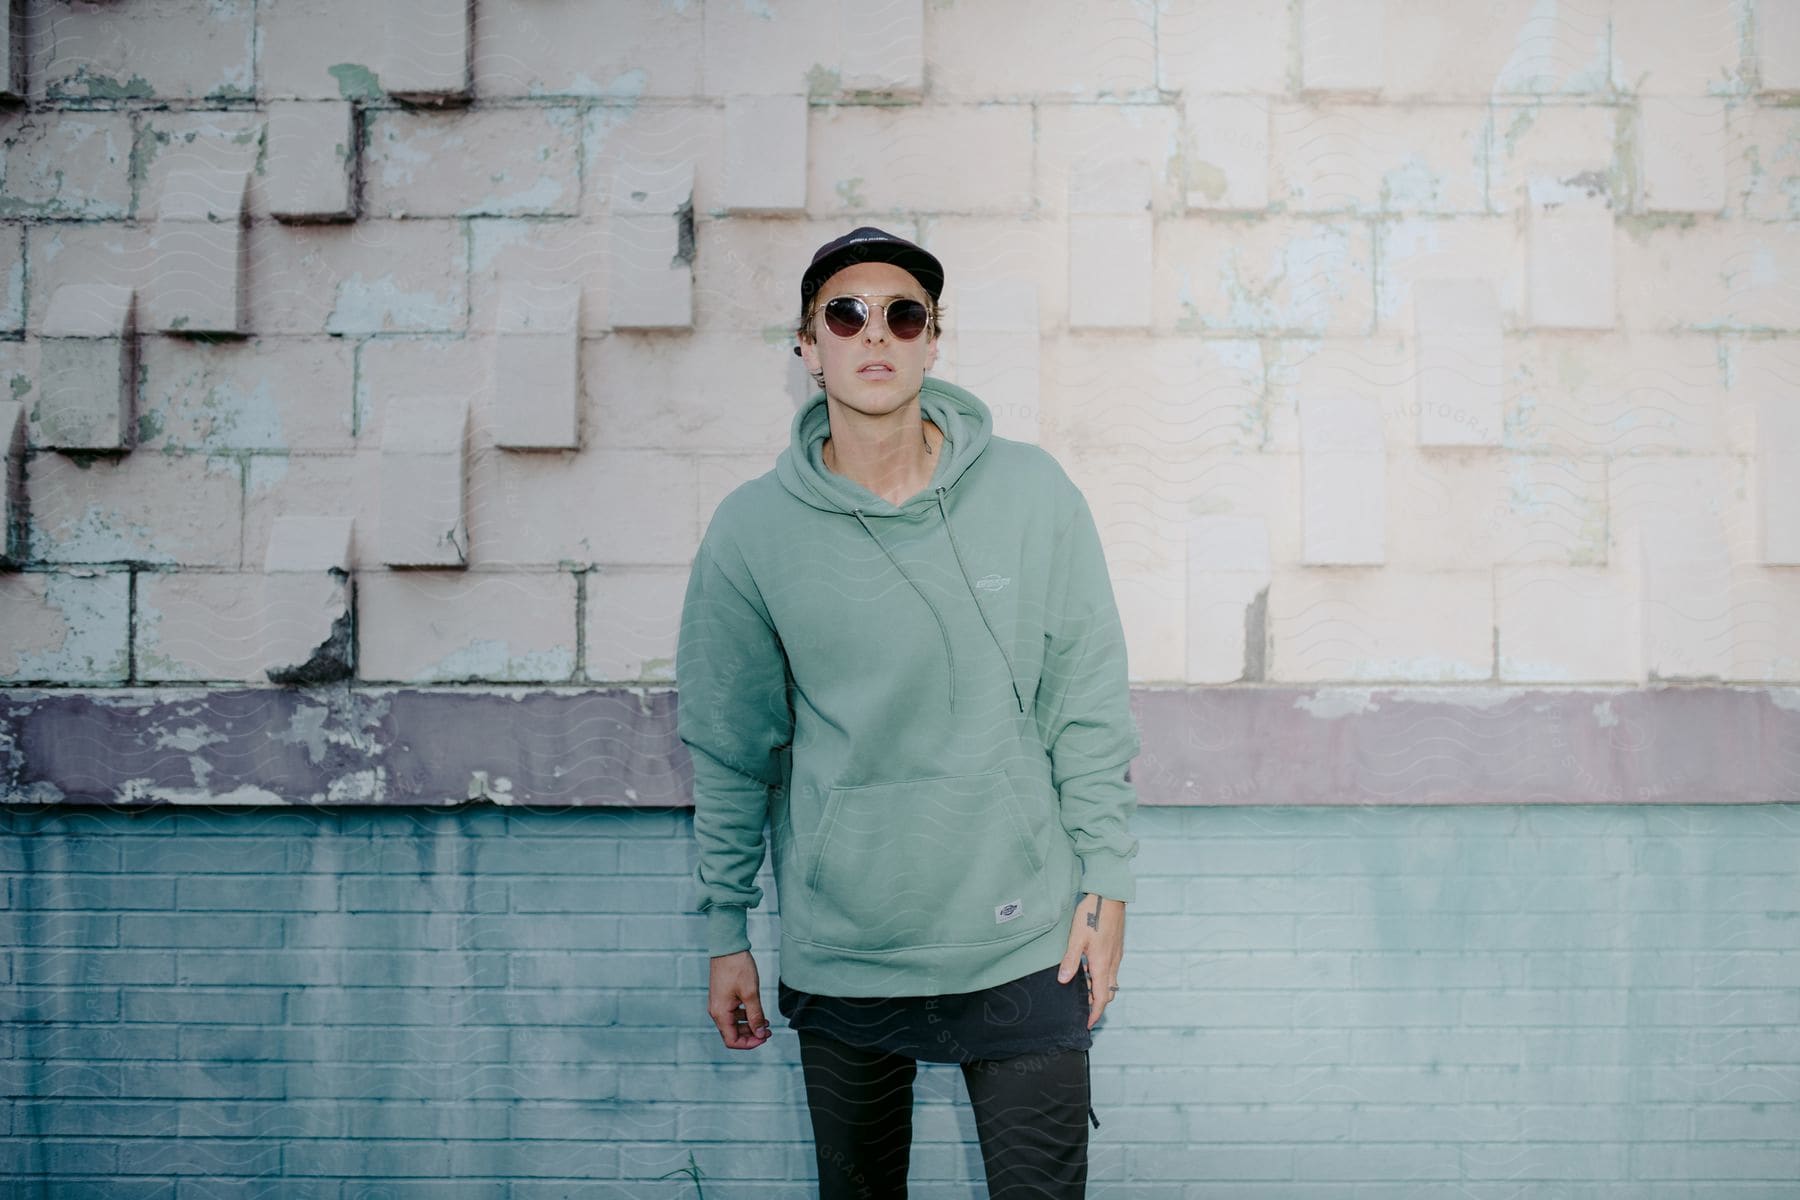 A man is standing against a brick wall wearing sun glasses and a hoodie.